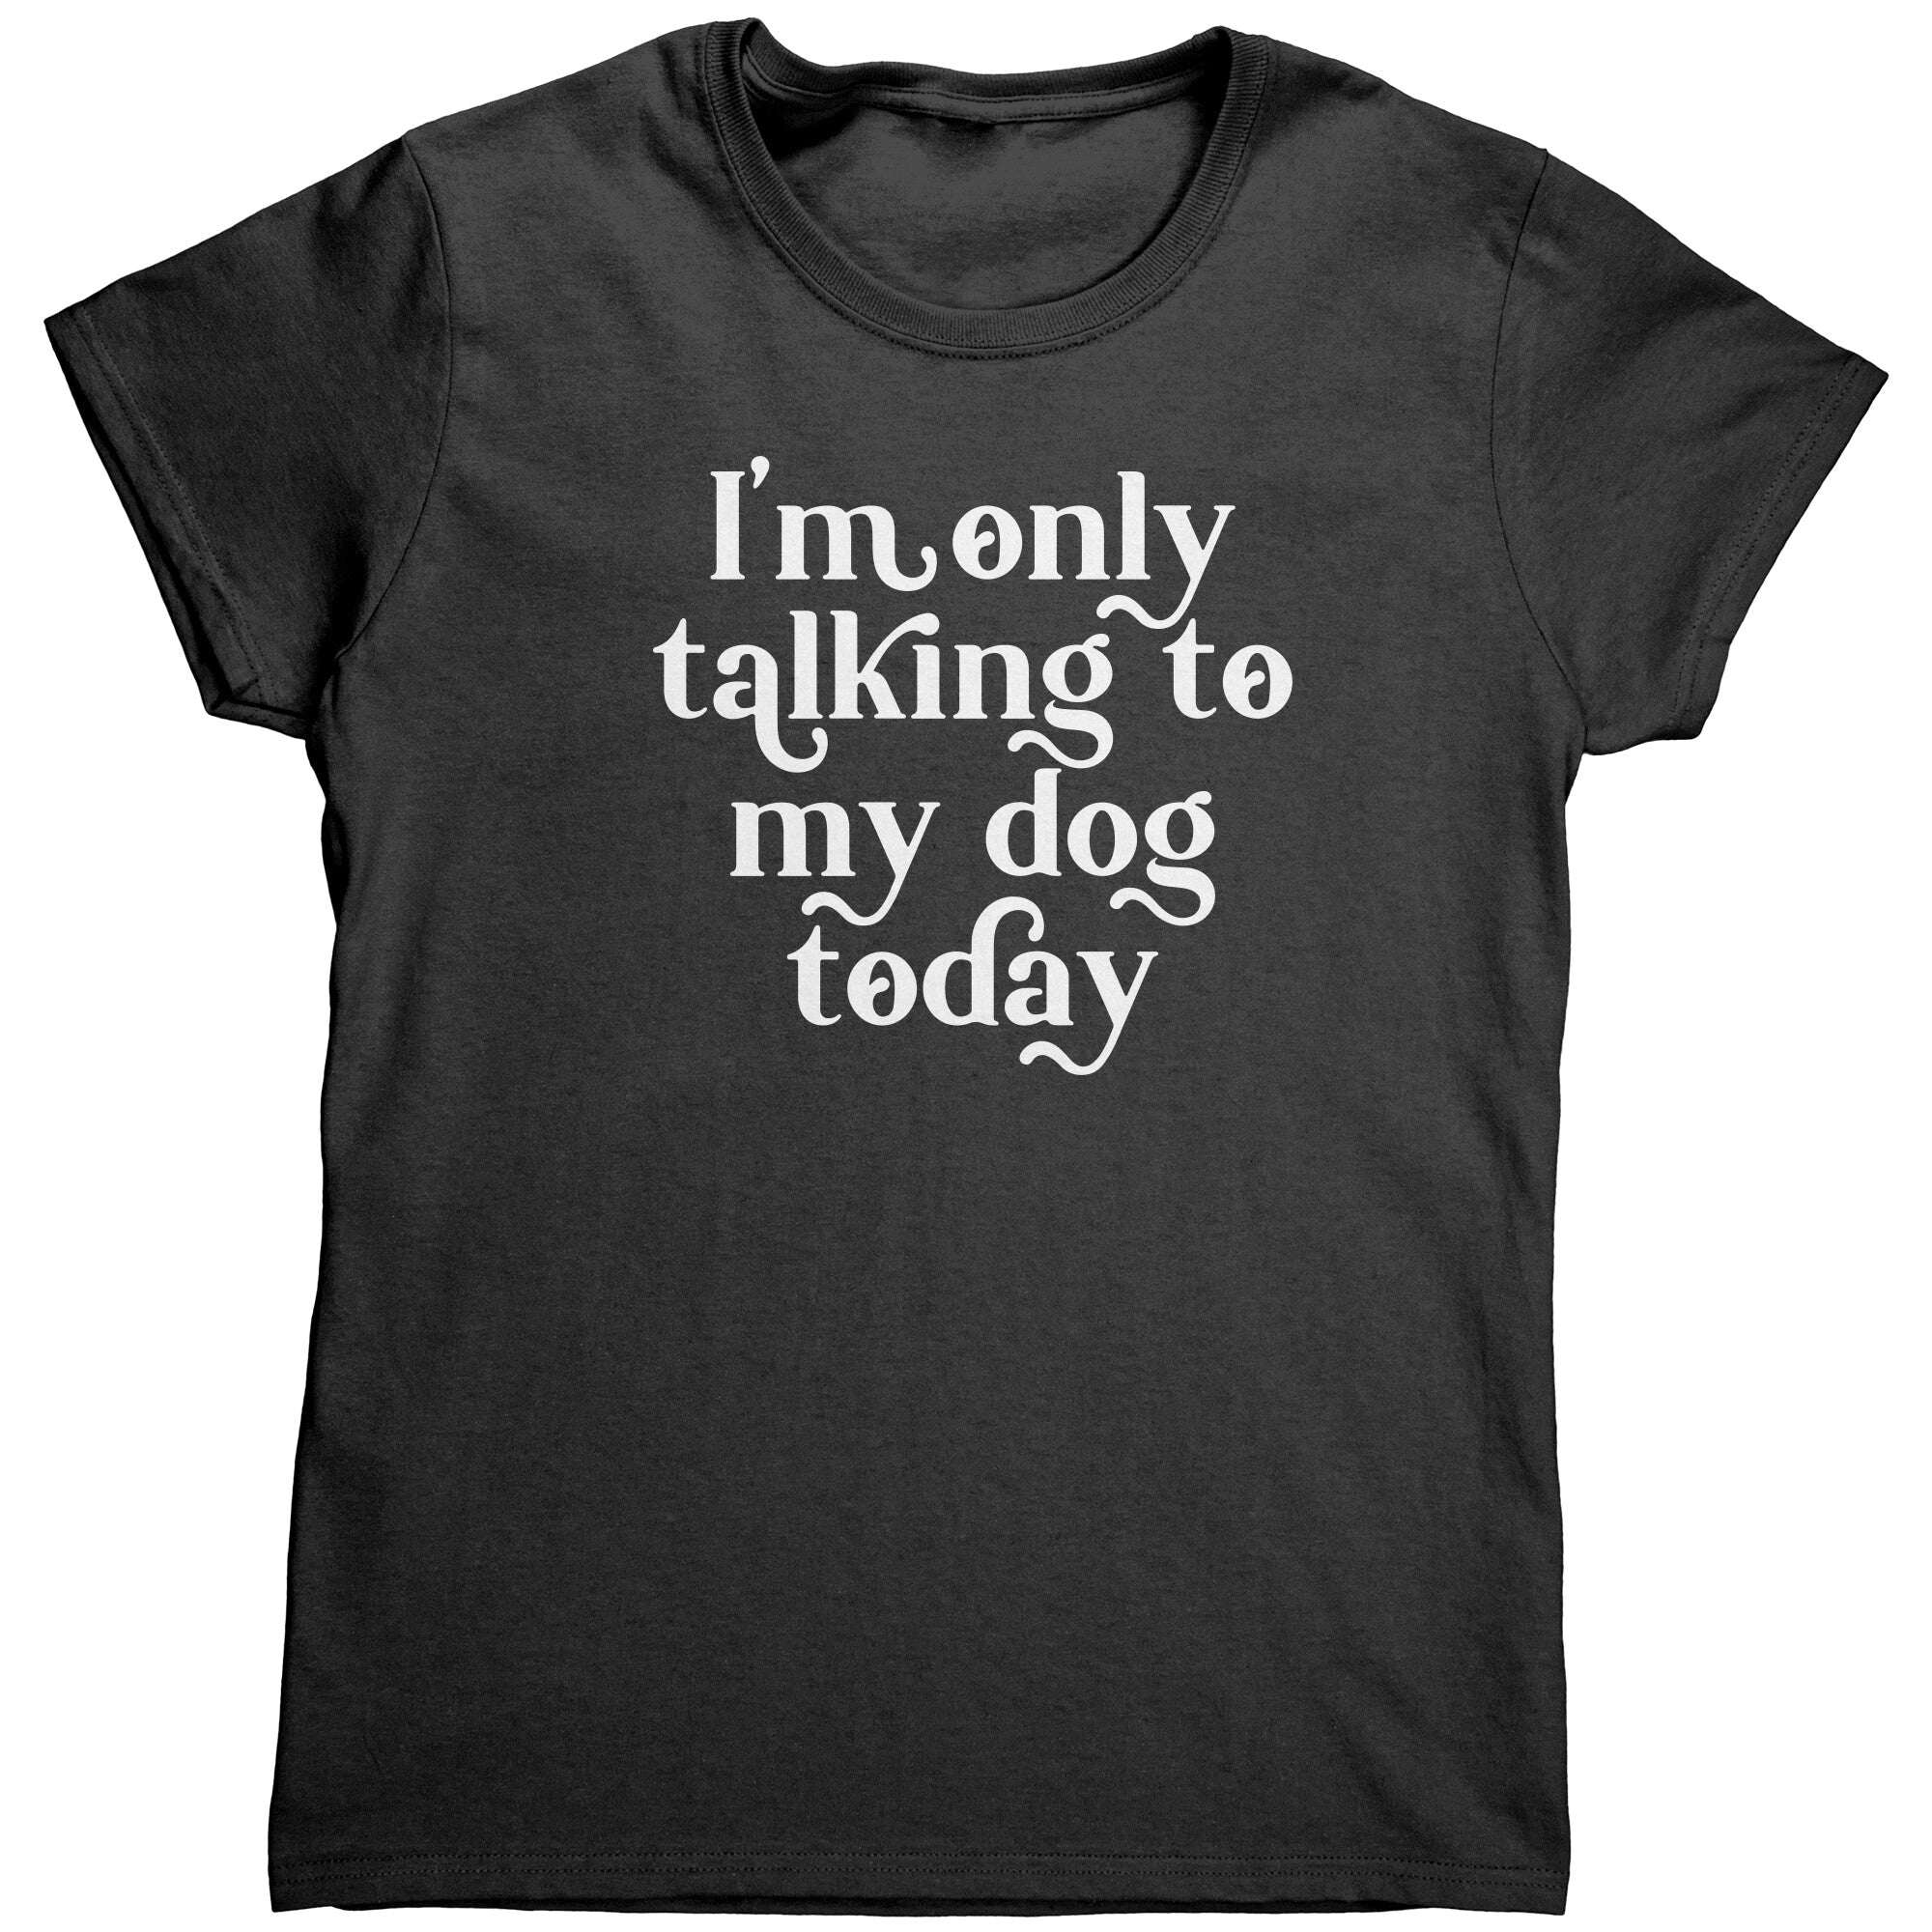 I'm Only Talking To My Dog Today (Ladies) -Apparel | Drunk America 